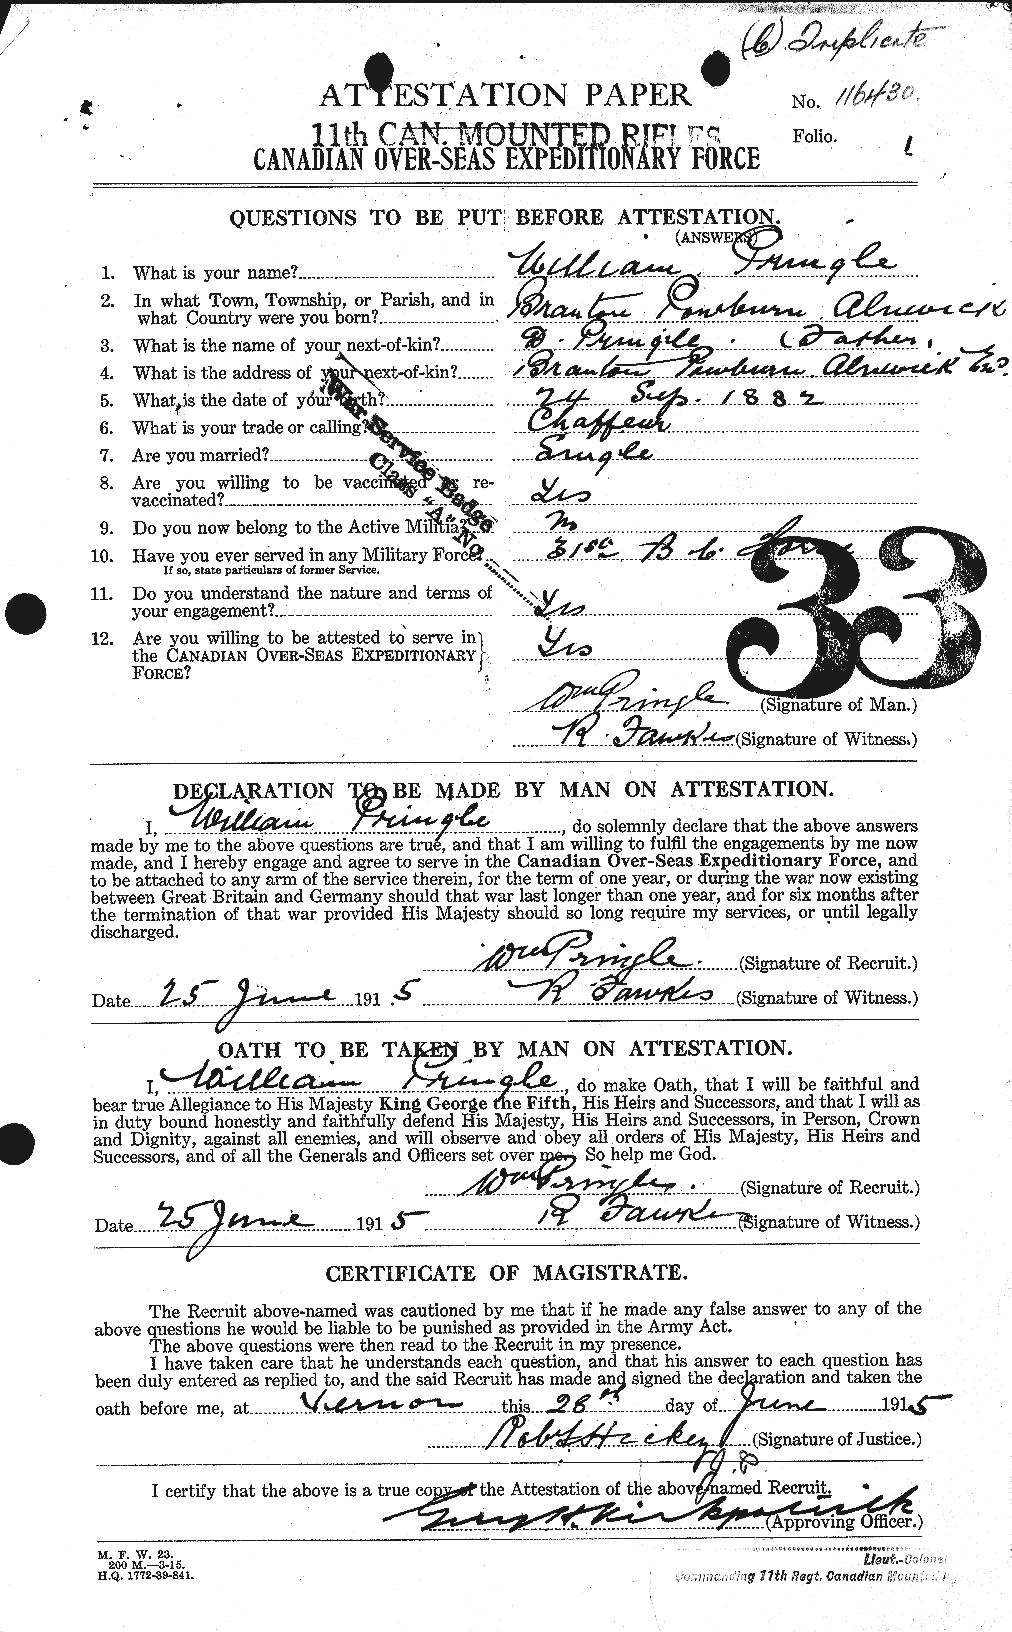 Personnel Records of the First World War - CEF 587979a